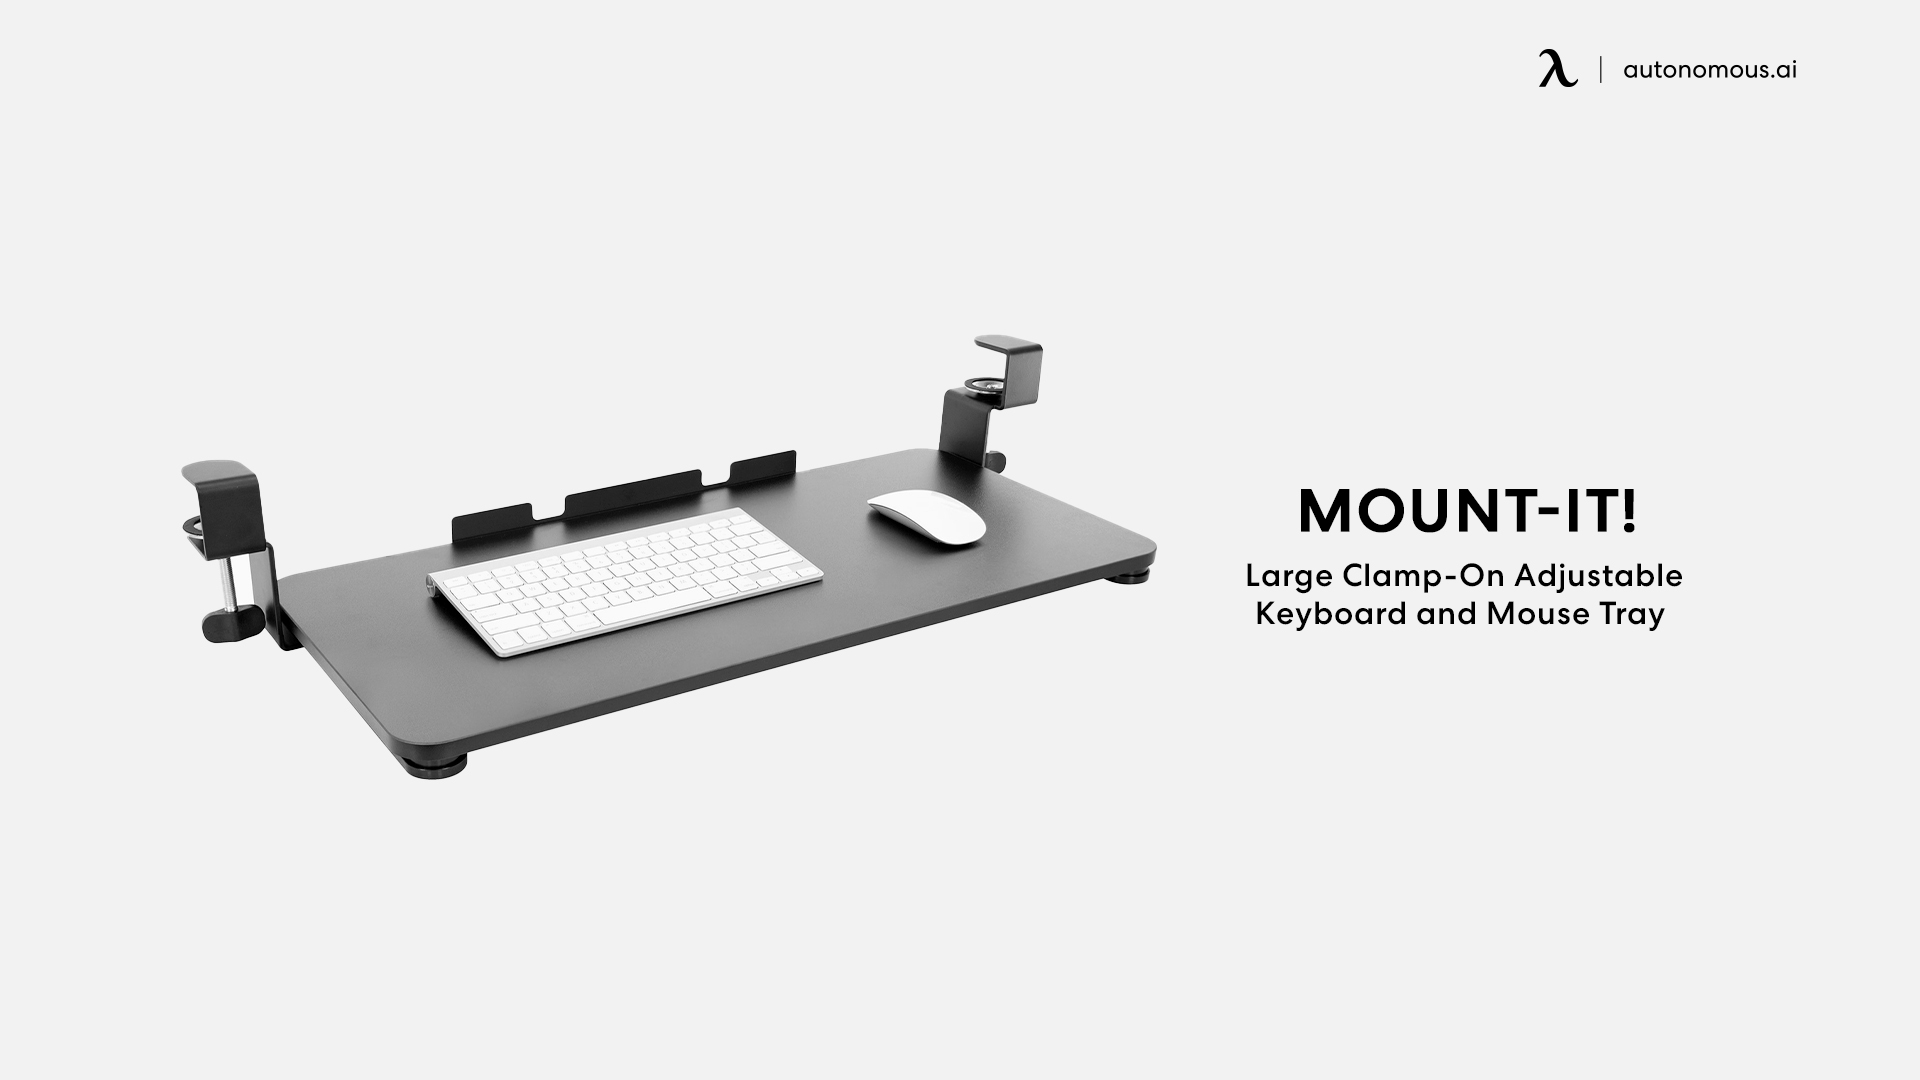 Clamp-On Adjustable Keyboard and Mouse Tray by Mount-It!